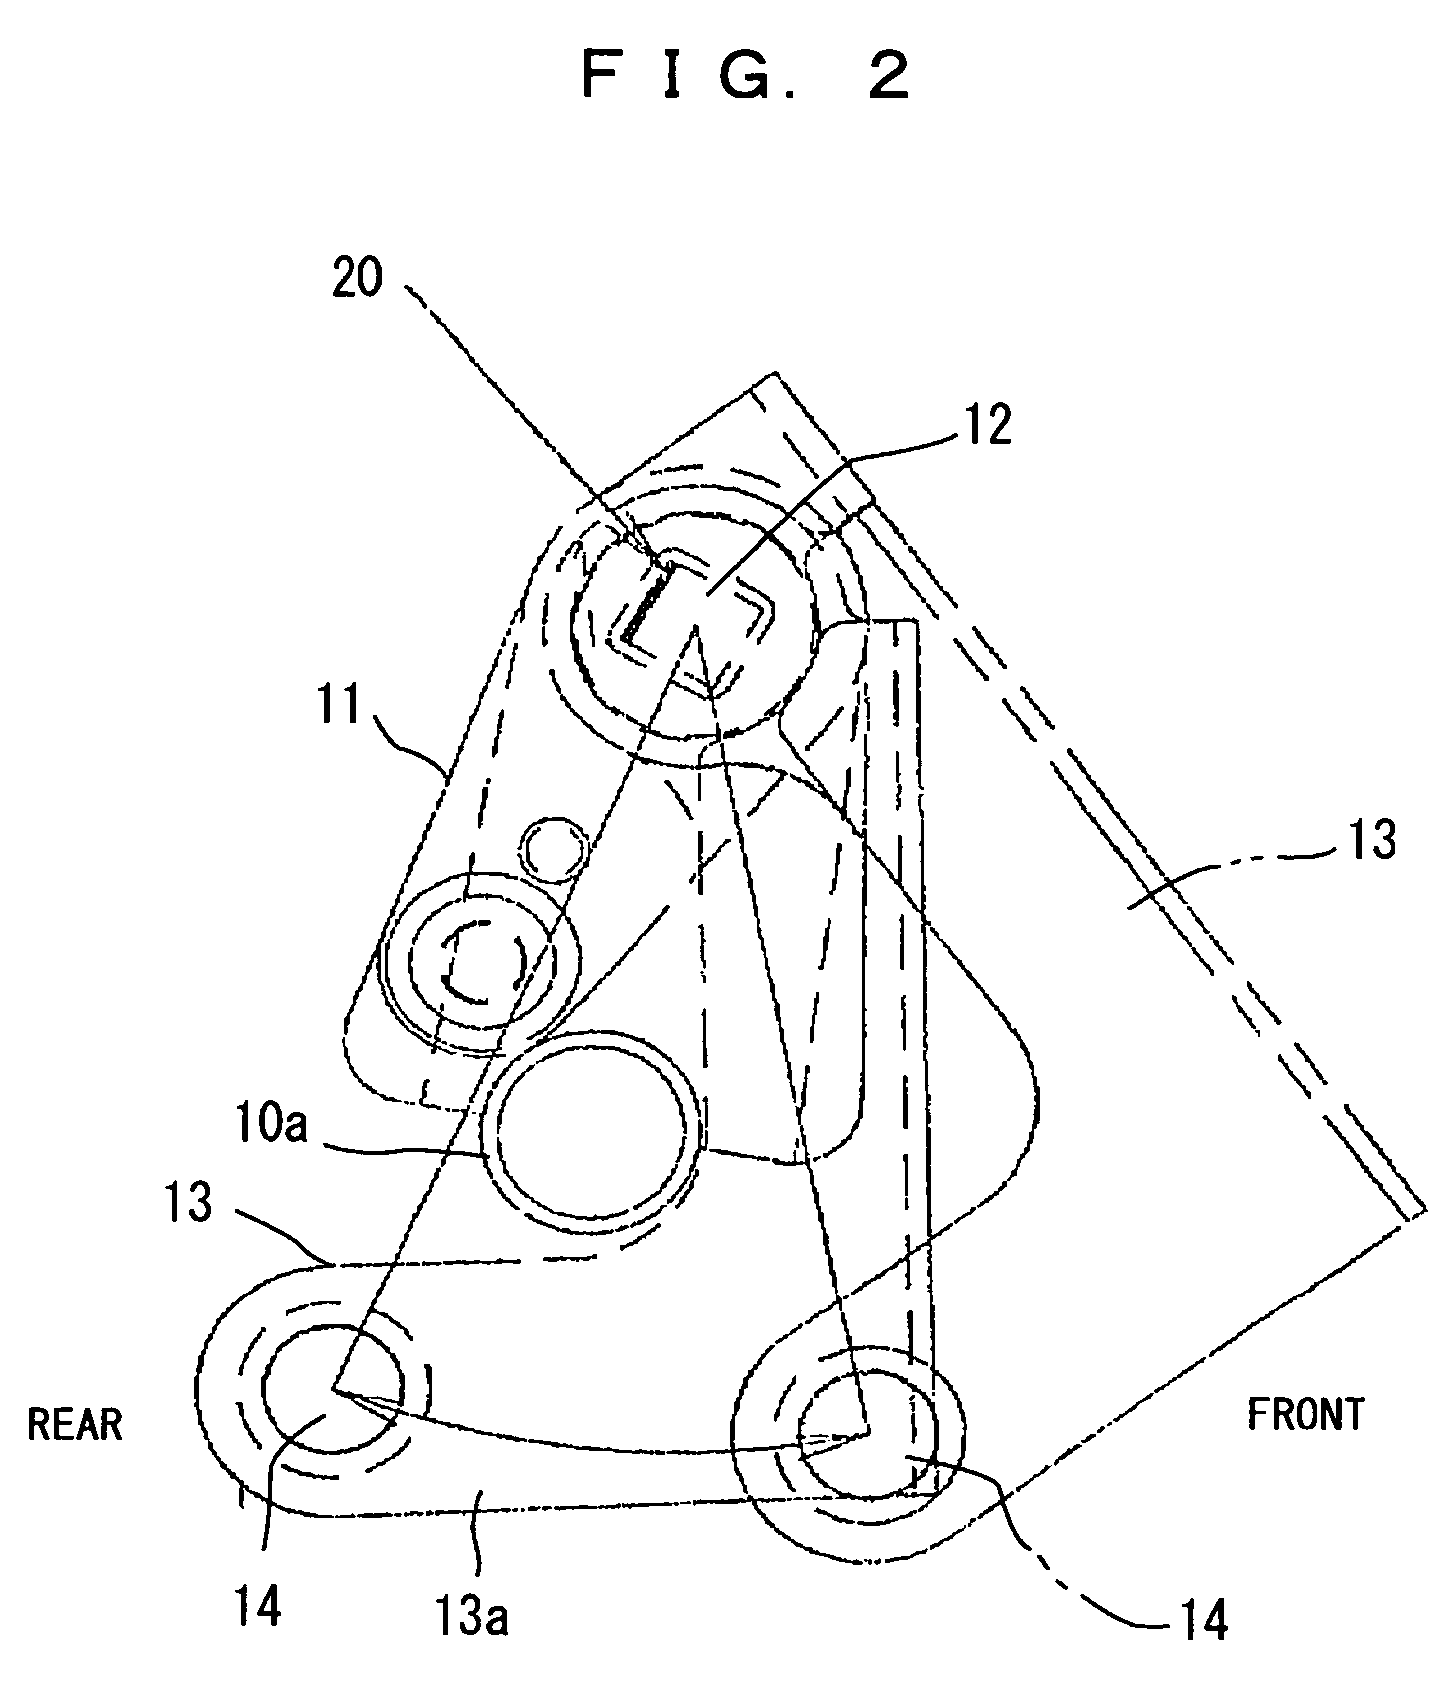 Seat structure and device for determining load on seat